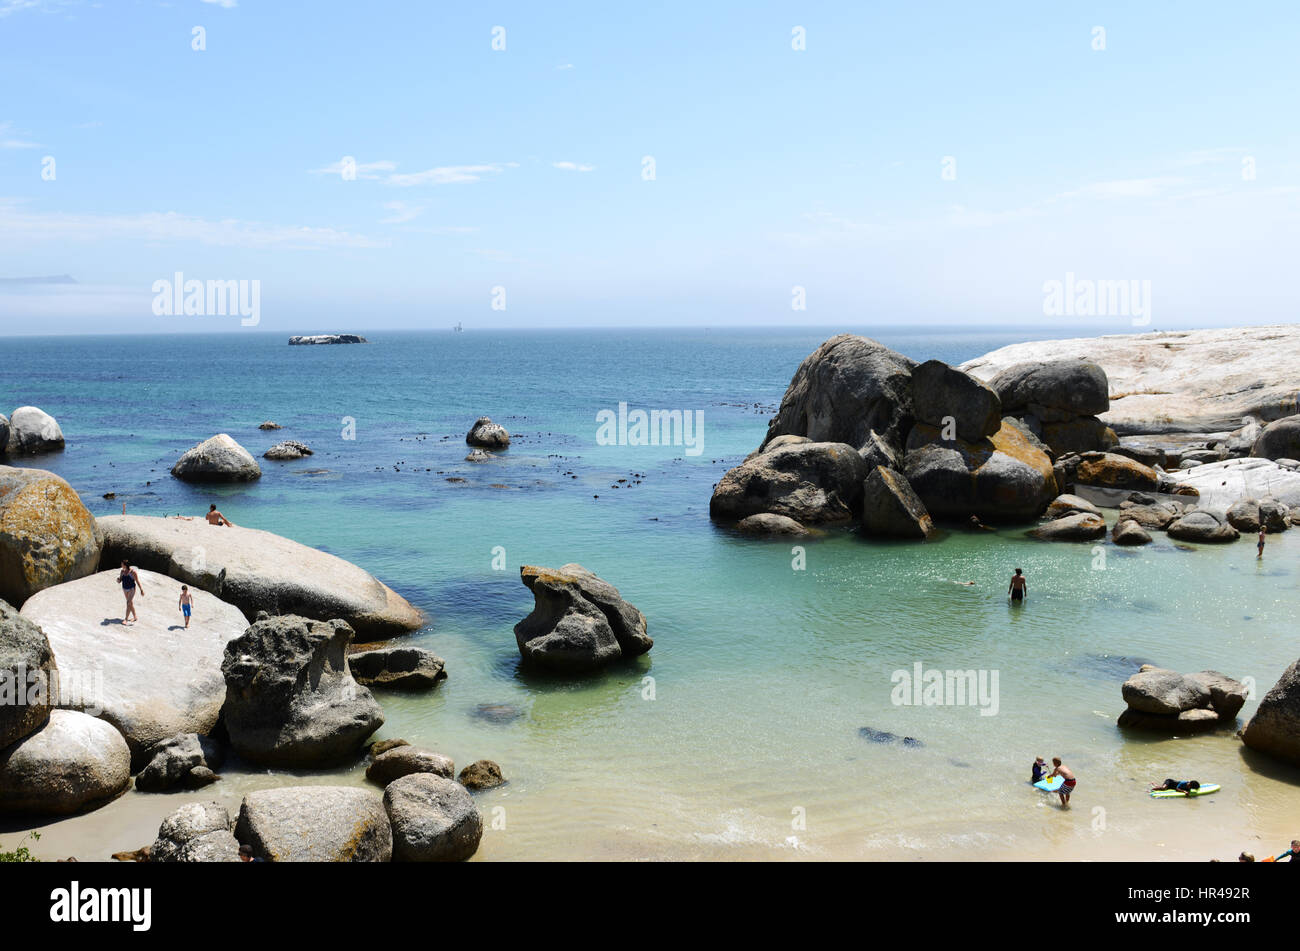 Visitors soaking up the sun on the sandy Boulders beach in the Cape Peninsula in South Africa. Stock Photo